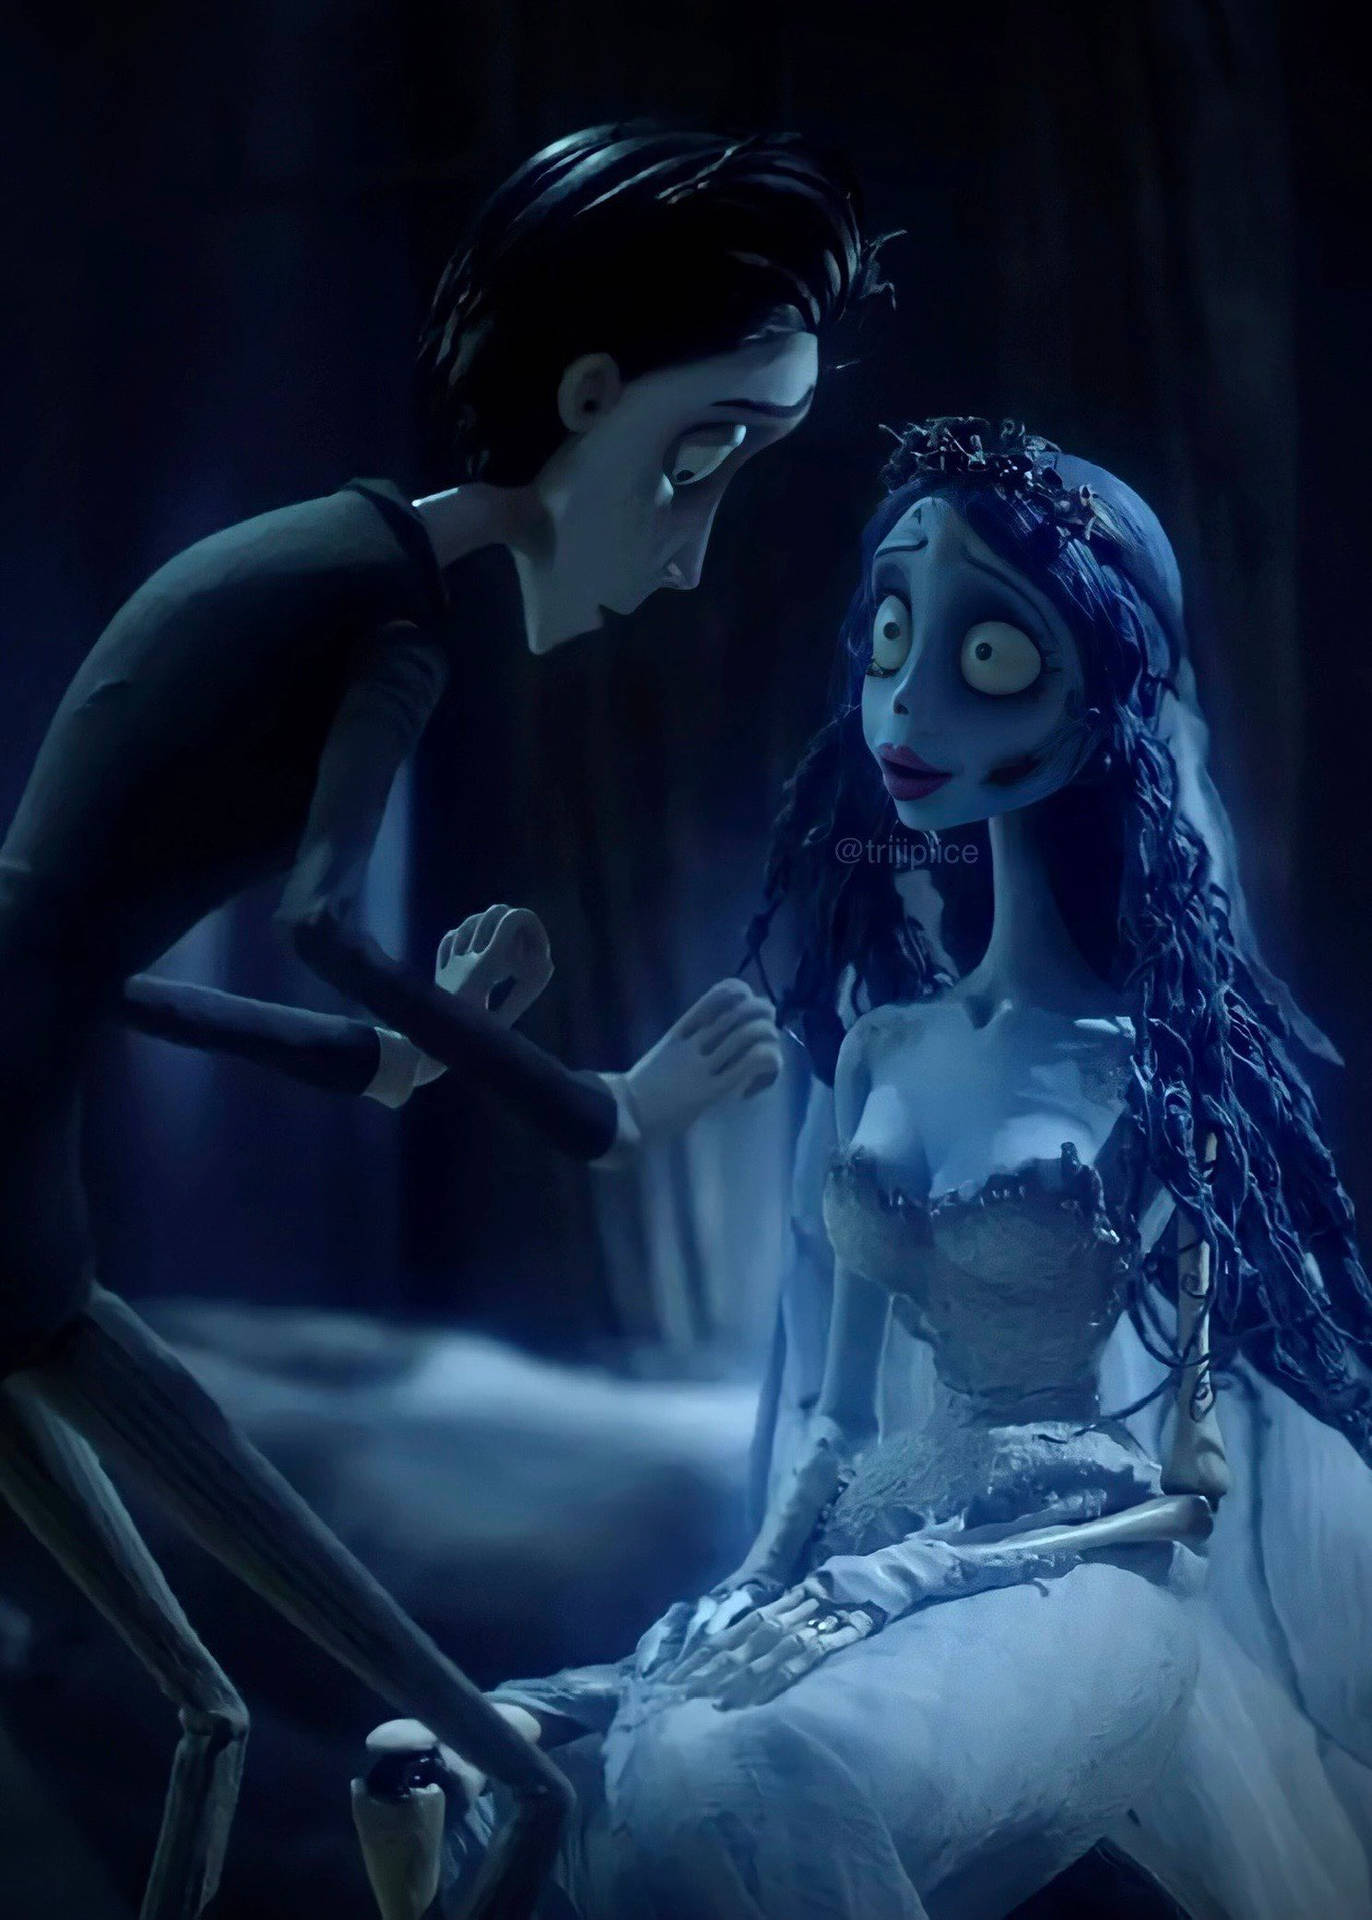 Victor Talking To Emily Corpse Bride Wallpaper